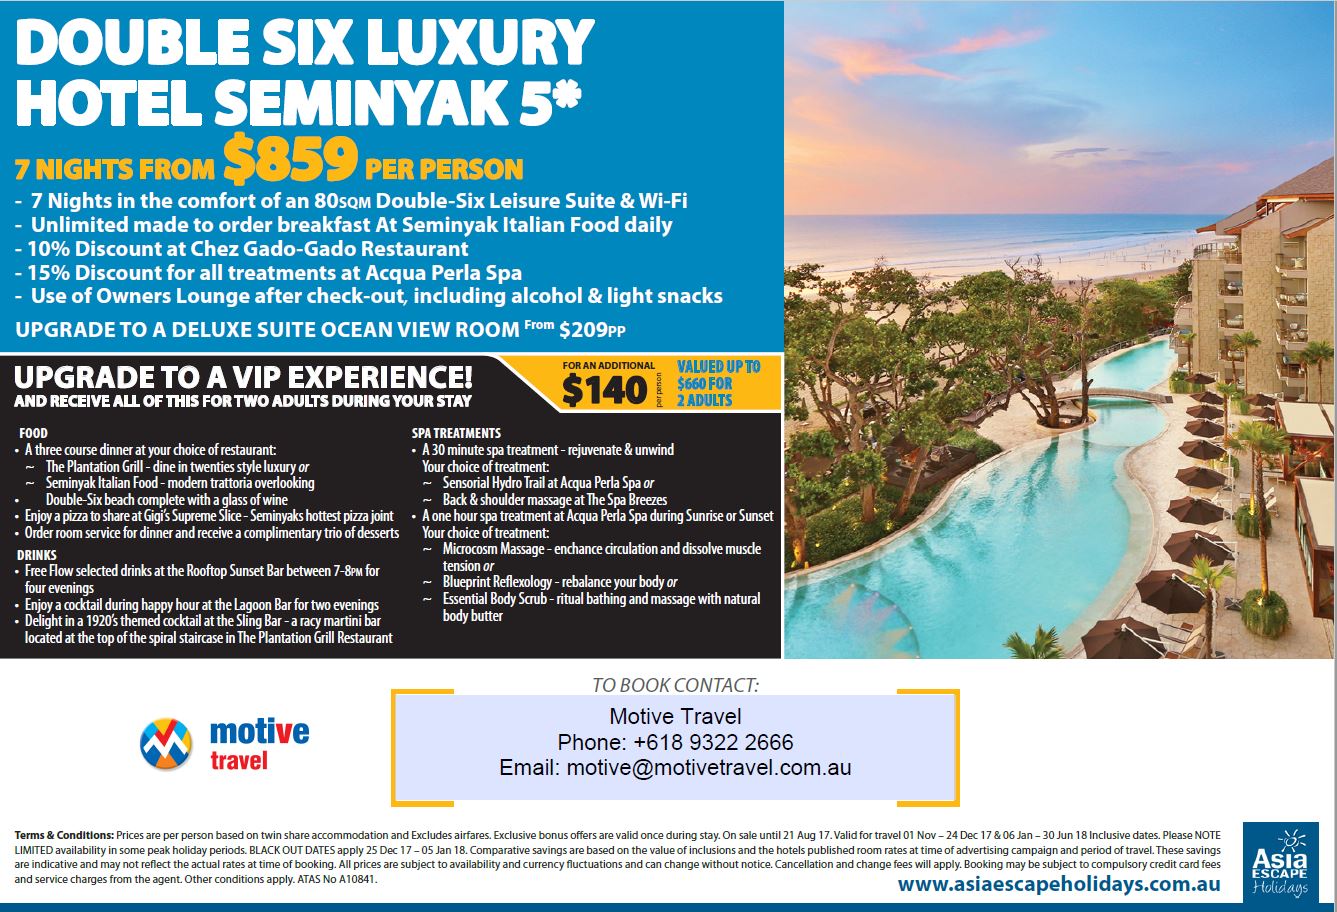 Asia Escape Holidays Double Six Offer ends 21Aug17